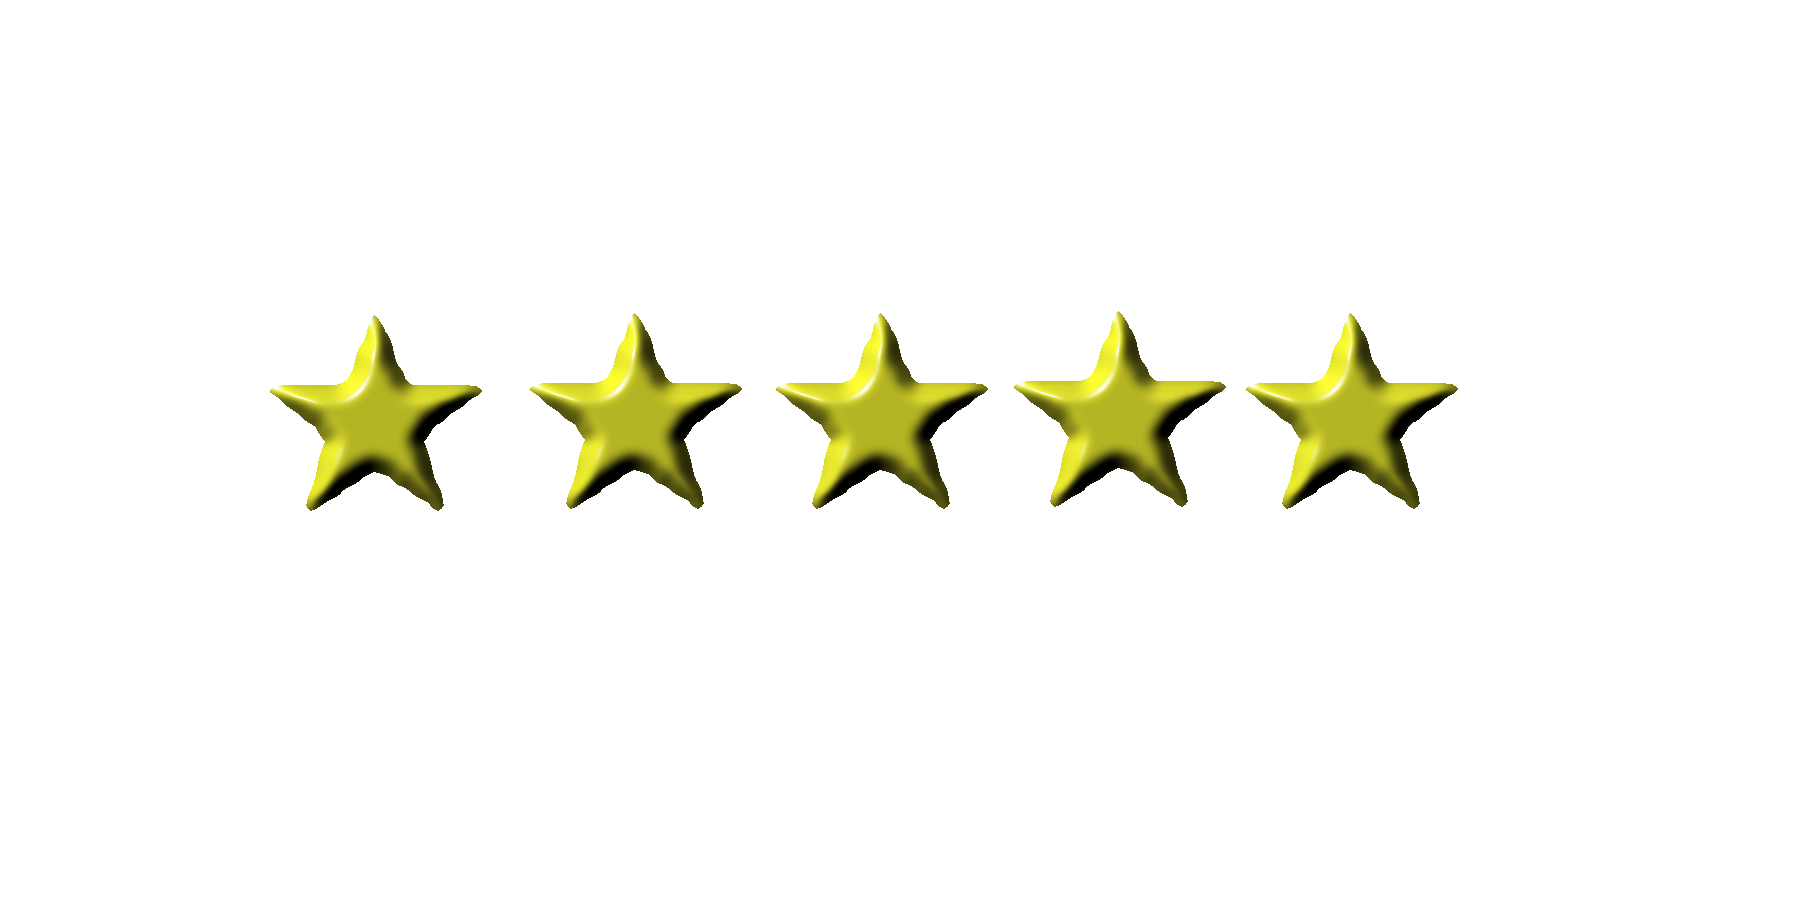 Pictures Of 5 Stars - ClipArt Best